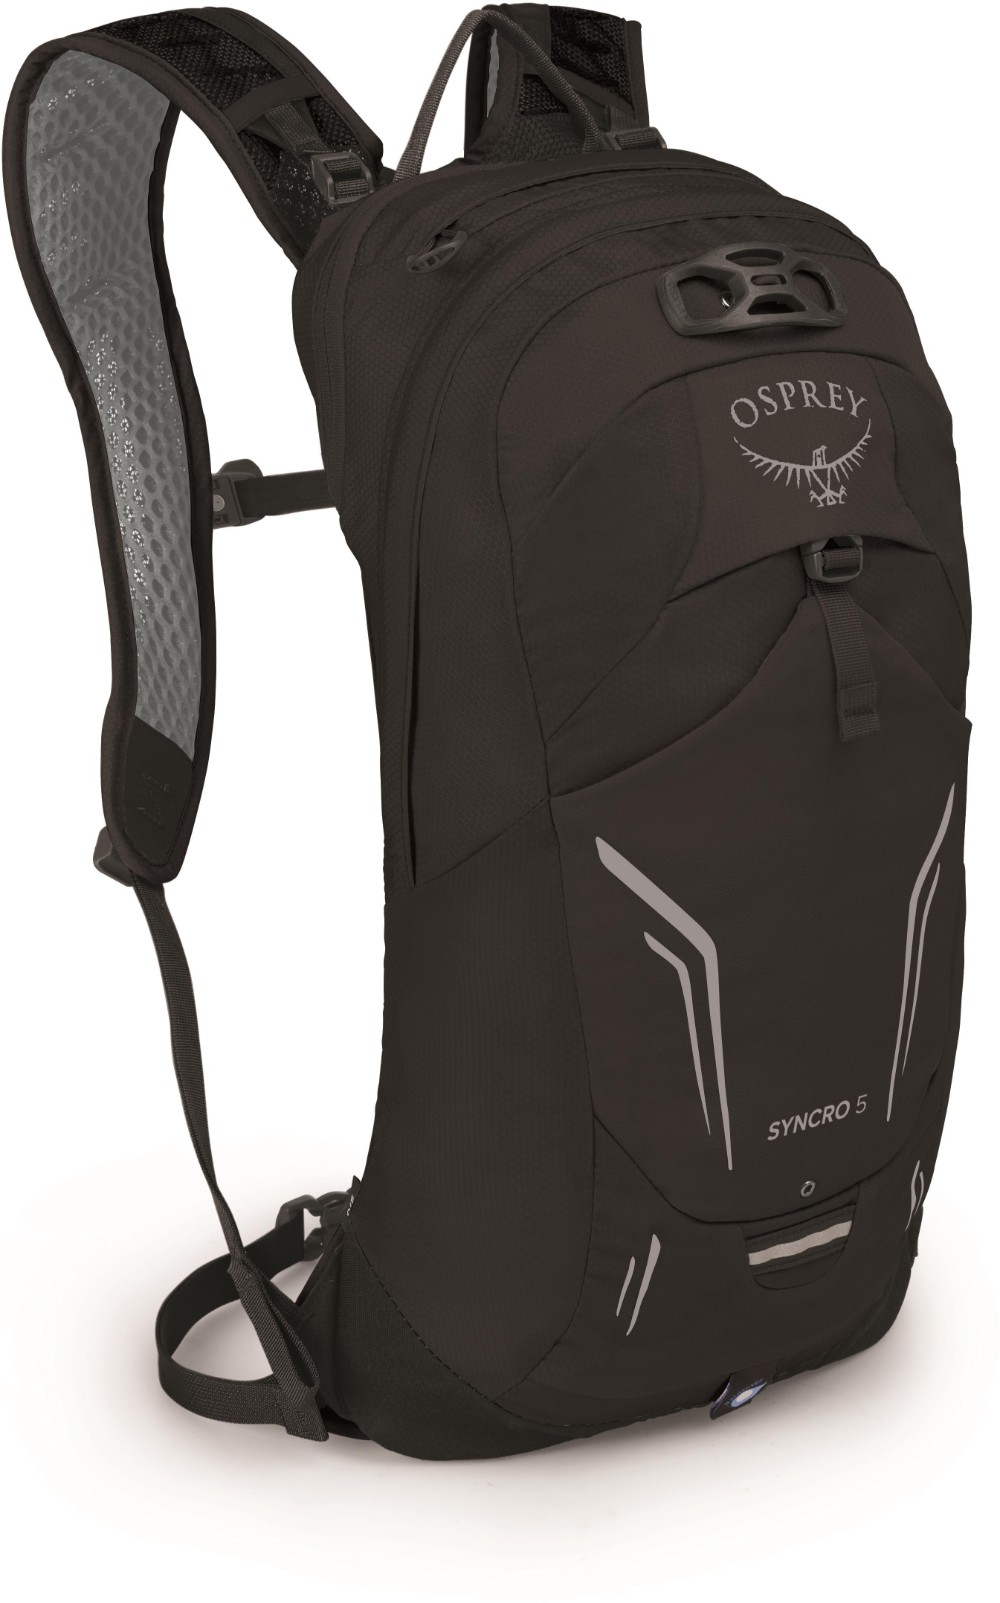 Syncro 5 Backpack image 0